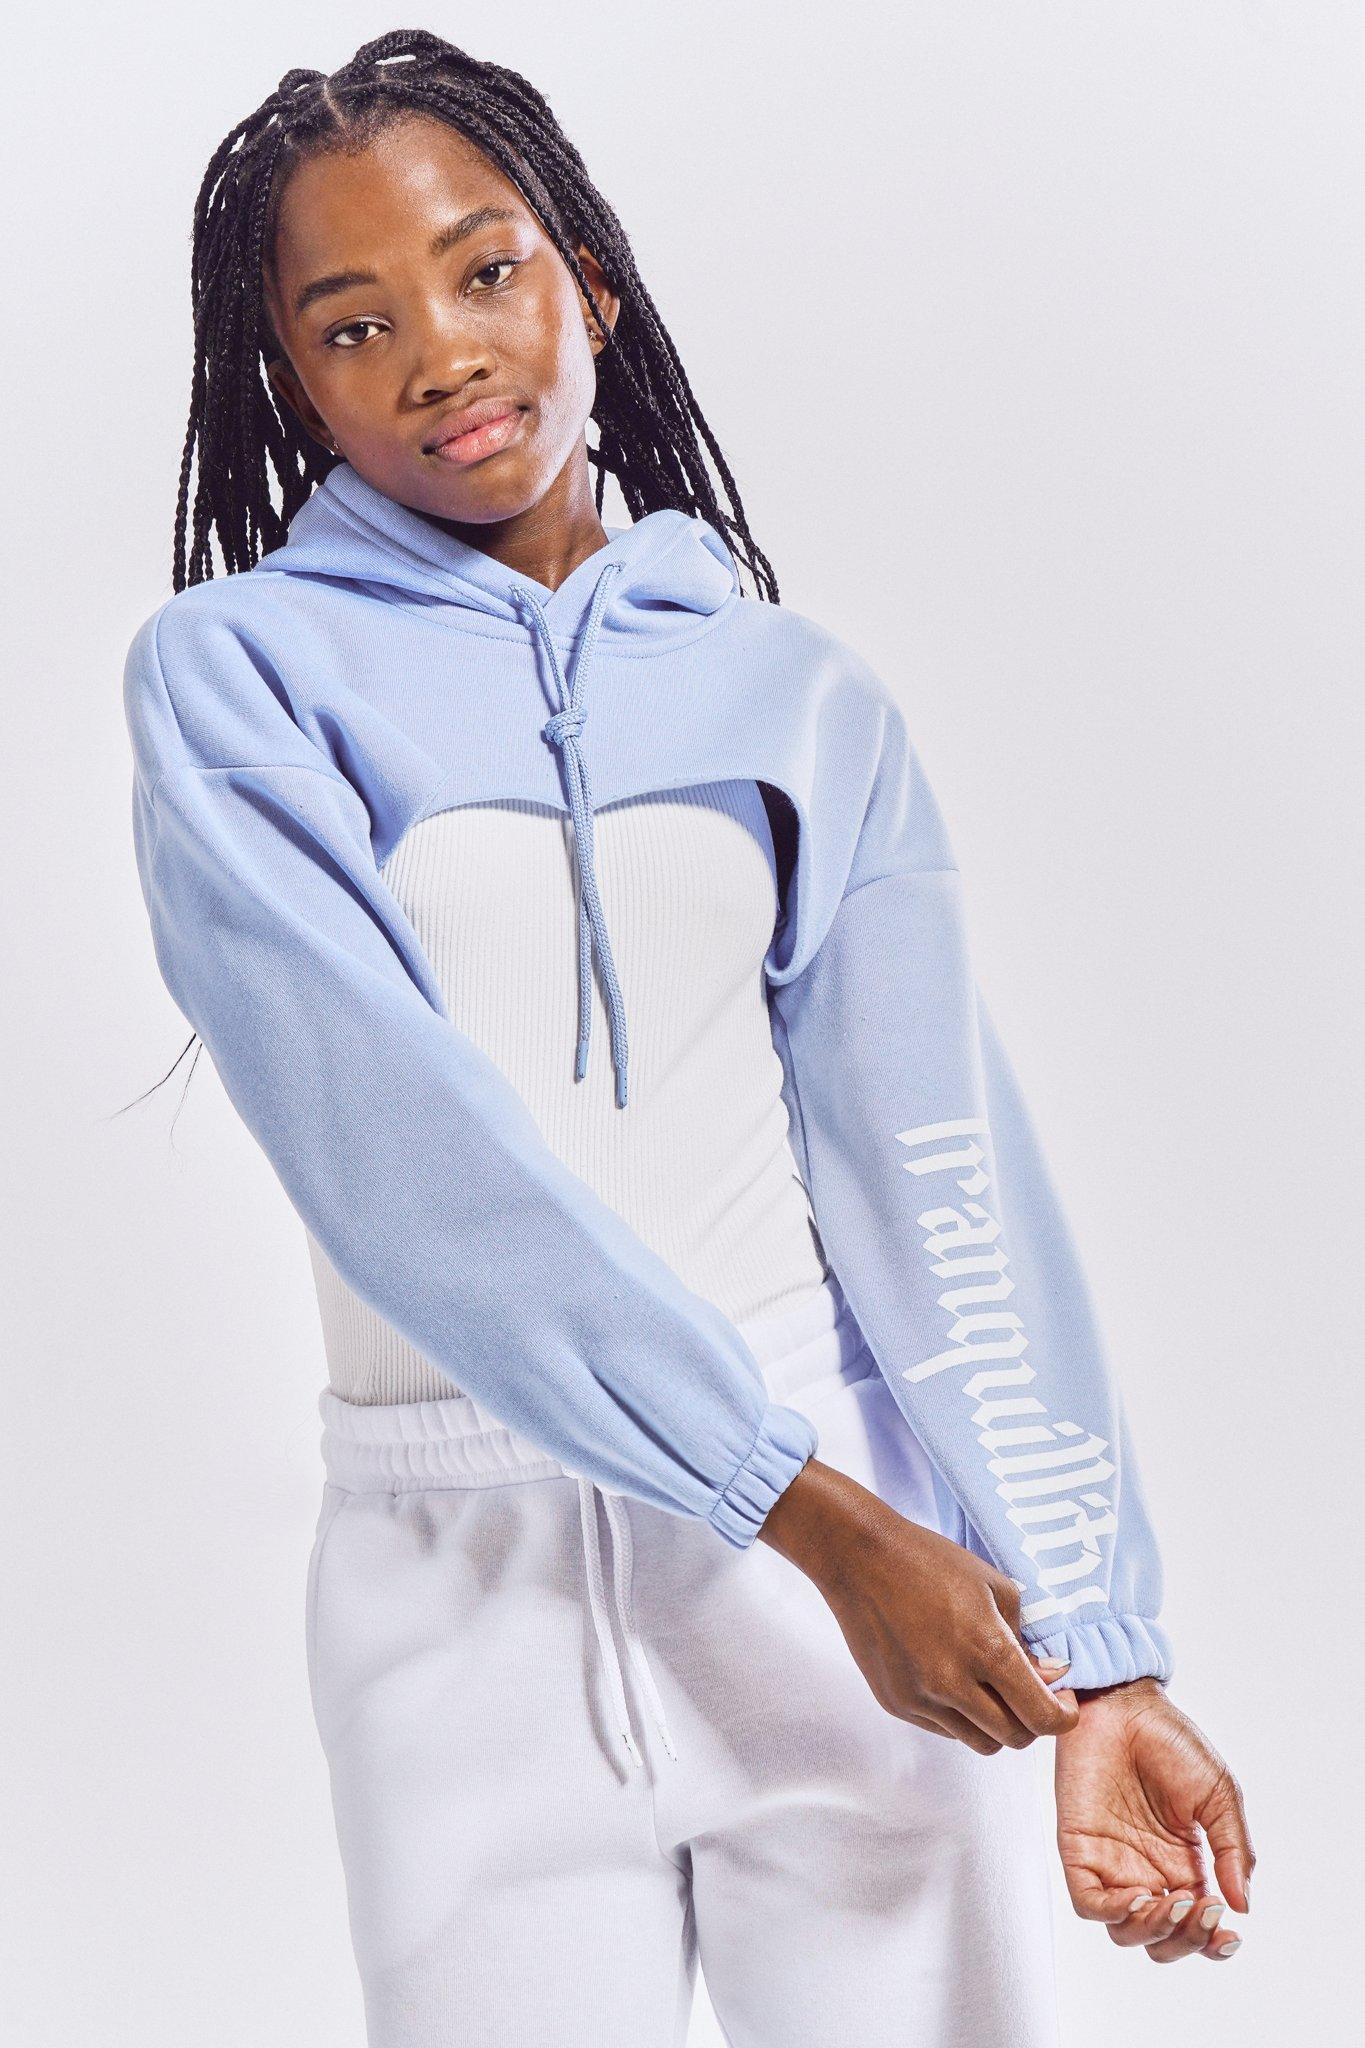 New in Girls 7-14 yrs Clothing, Shop Online